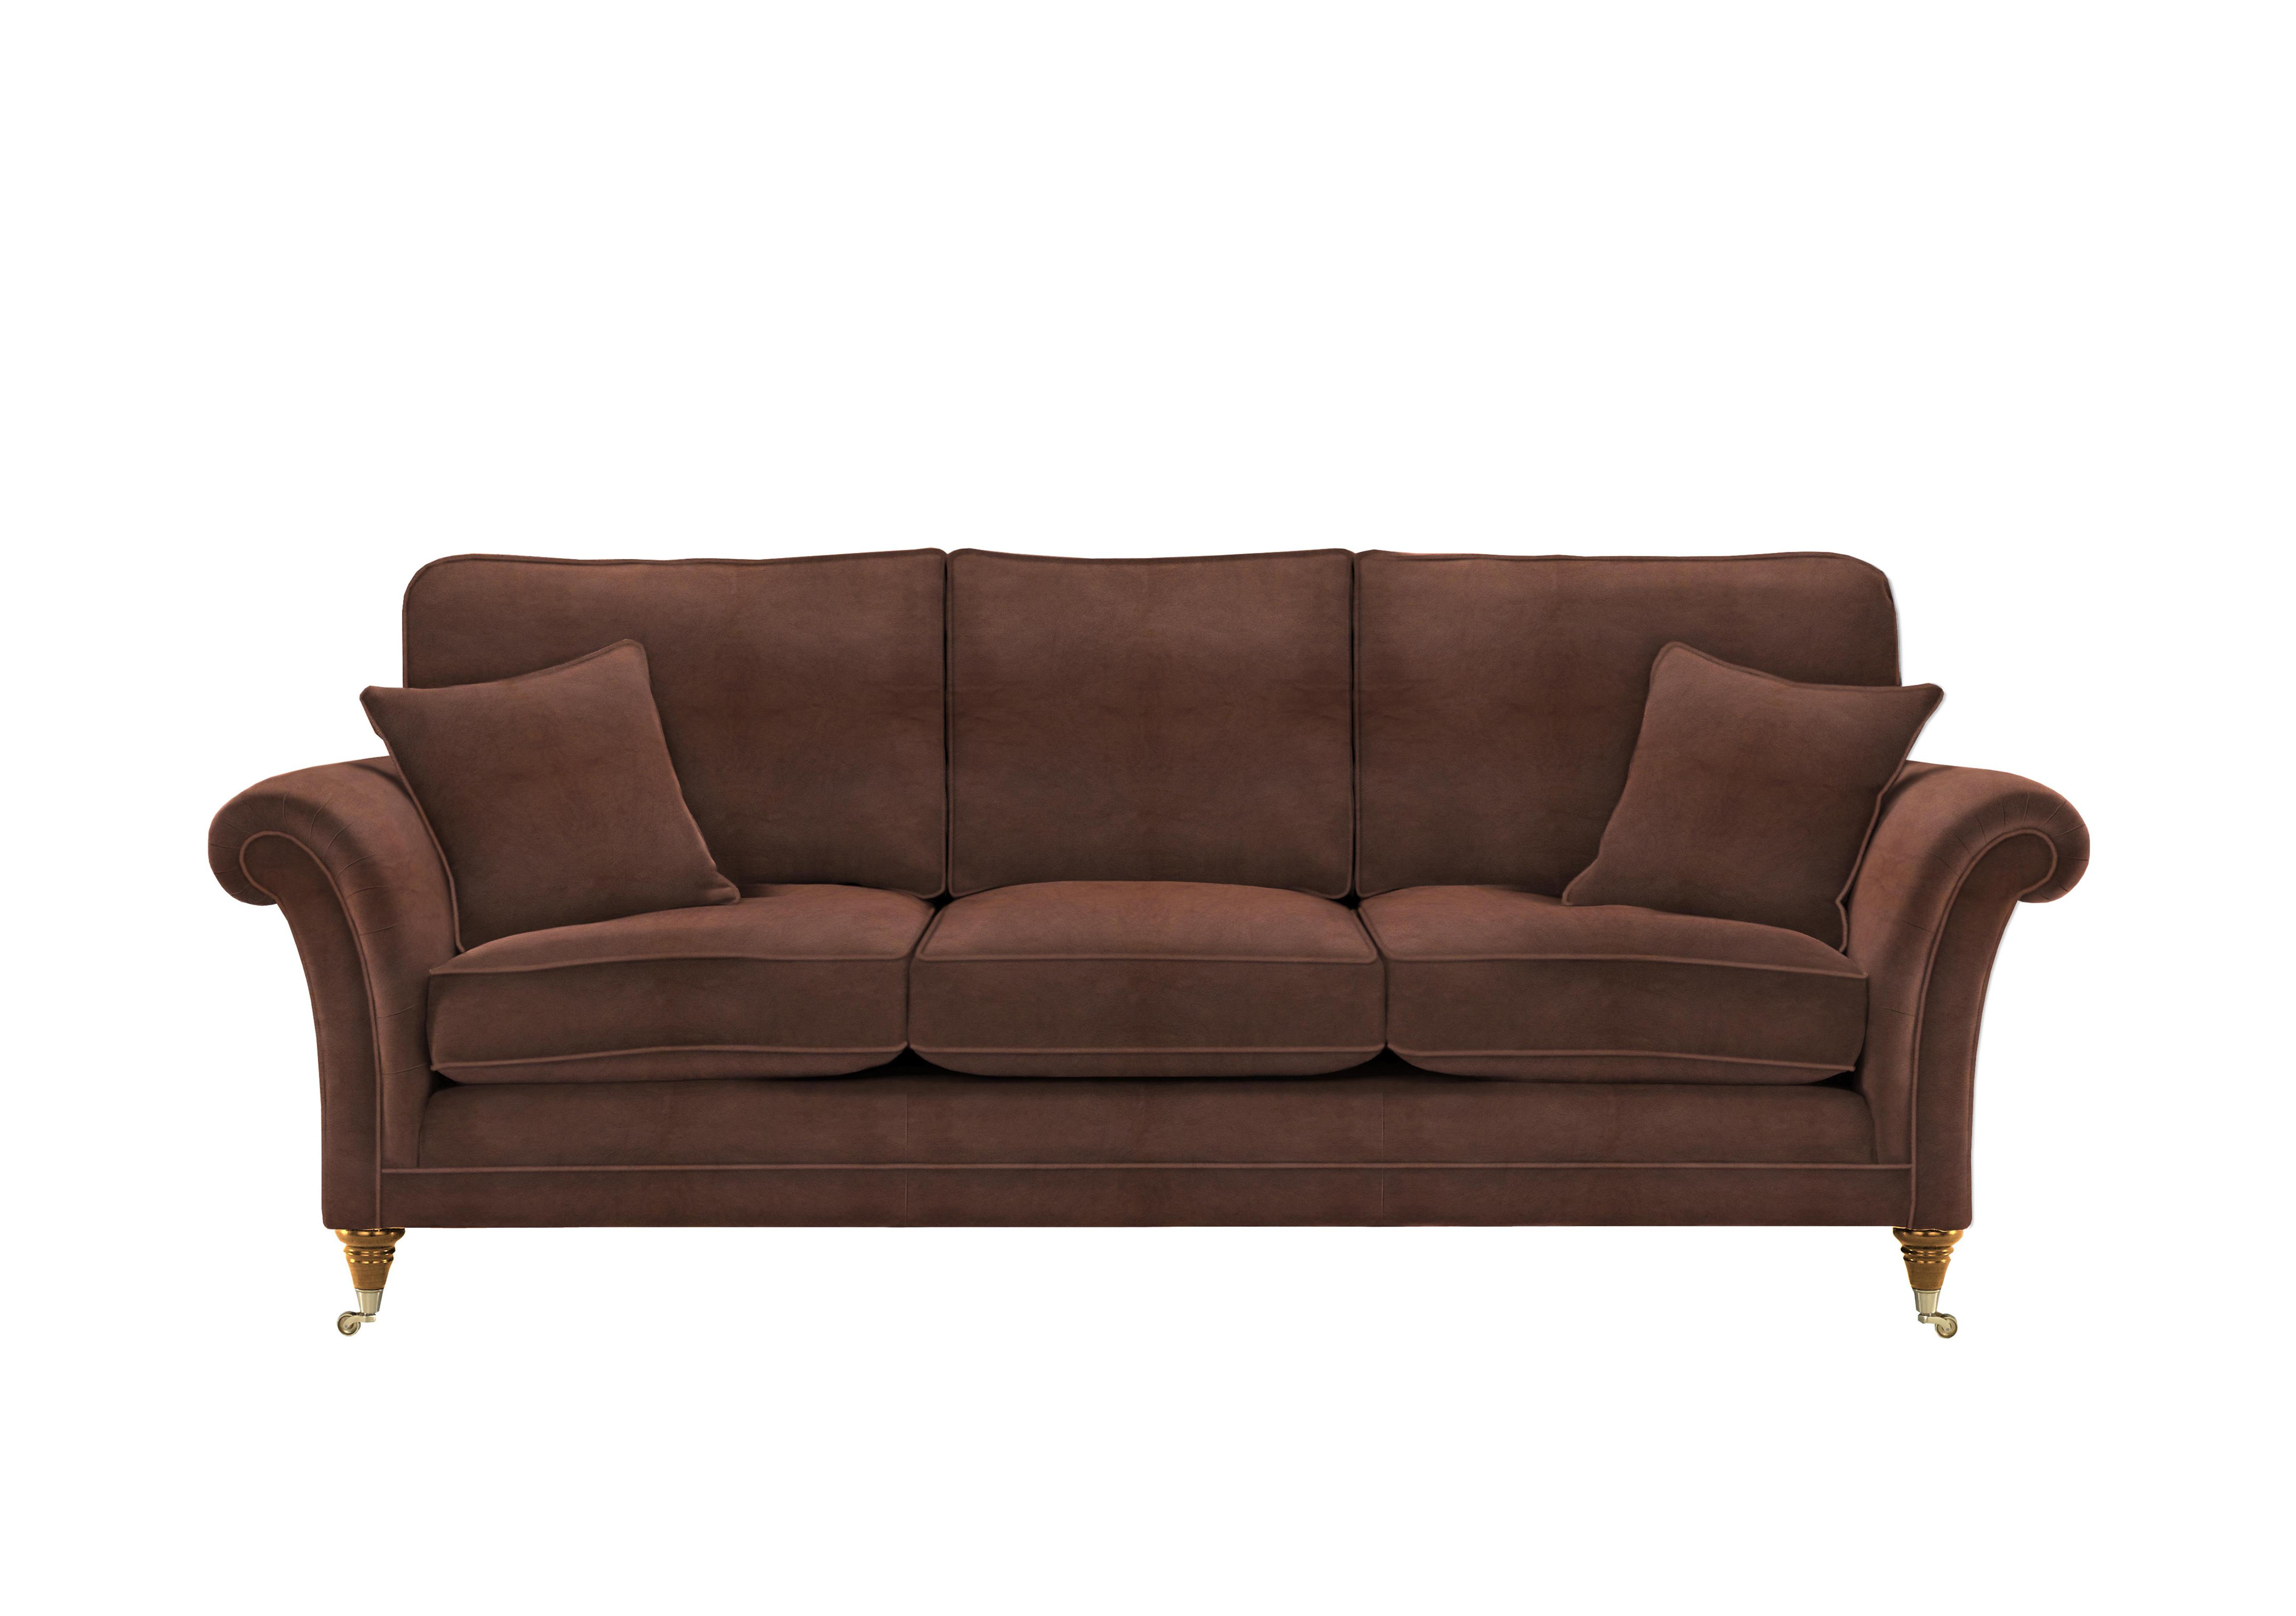 Burghley Grand Leather Sofa in London Saddle 001033-0021 on Furniture Village